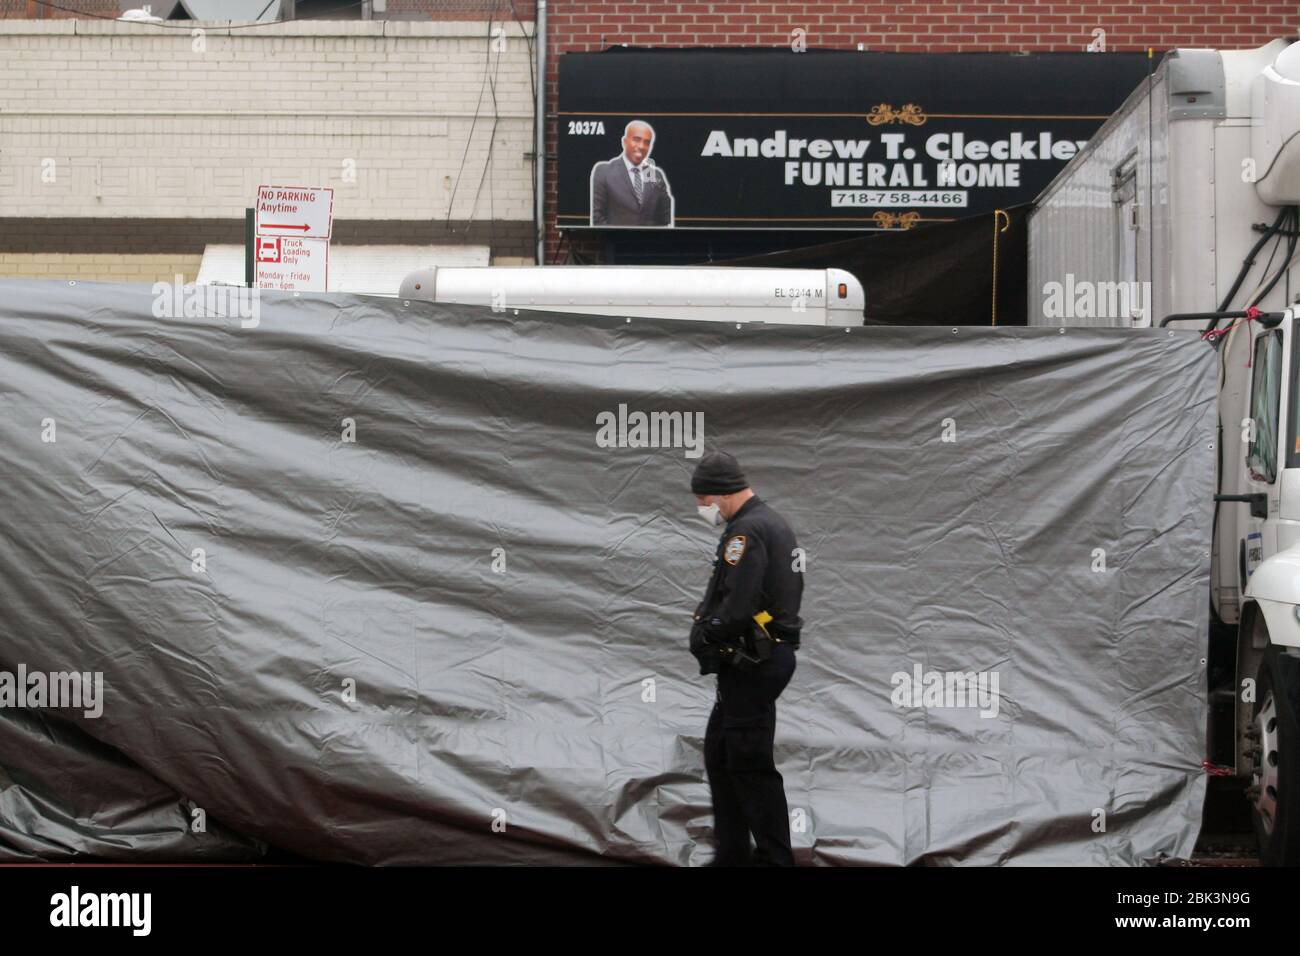 New York, New York, USA. 30th Apr, 2020. A NYPD officer walks past a large brown tarp that has been deployed in front of the Andrew T. Cleckley Funeral Home in Brooklyn where bodies non properly cared are removed. 60 bodies were stored in 4 non-refregerated vehiciles lining the street nearby stores. Neighbors reported a foul smell still persistent and fluids dripping from the trucks. Some remains were also found lying on the facilityÃ¢â‚¬â„¢s floor. The funeral home was overwhelmed by COVID-19 deaths in New York. Credit: Marie Le Ble/ZUMA Wire/Alamy Live News Stock Photo